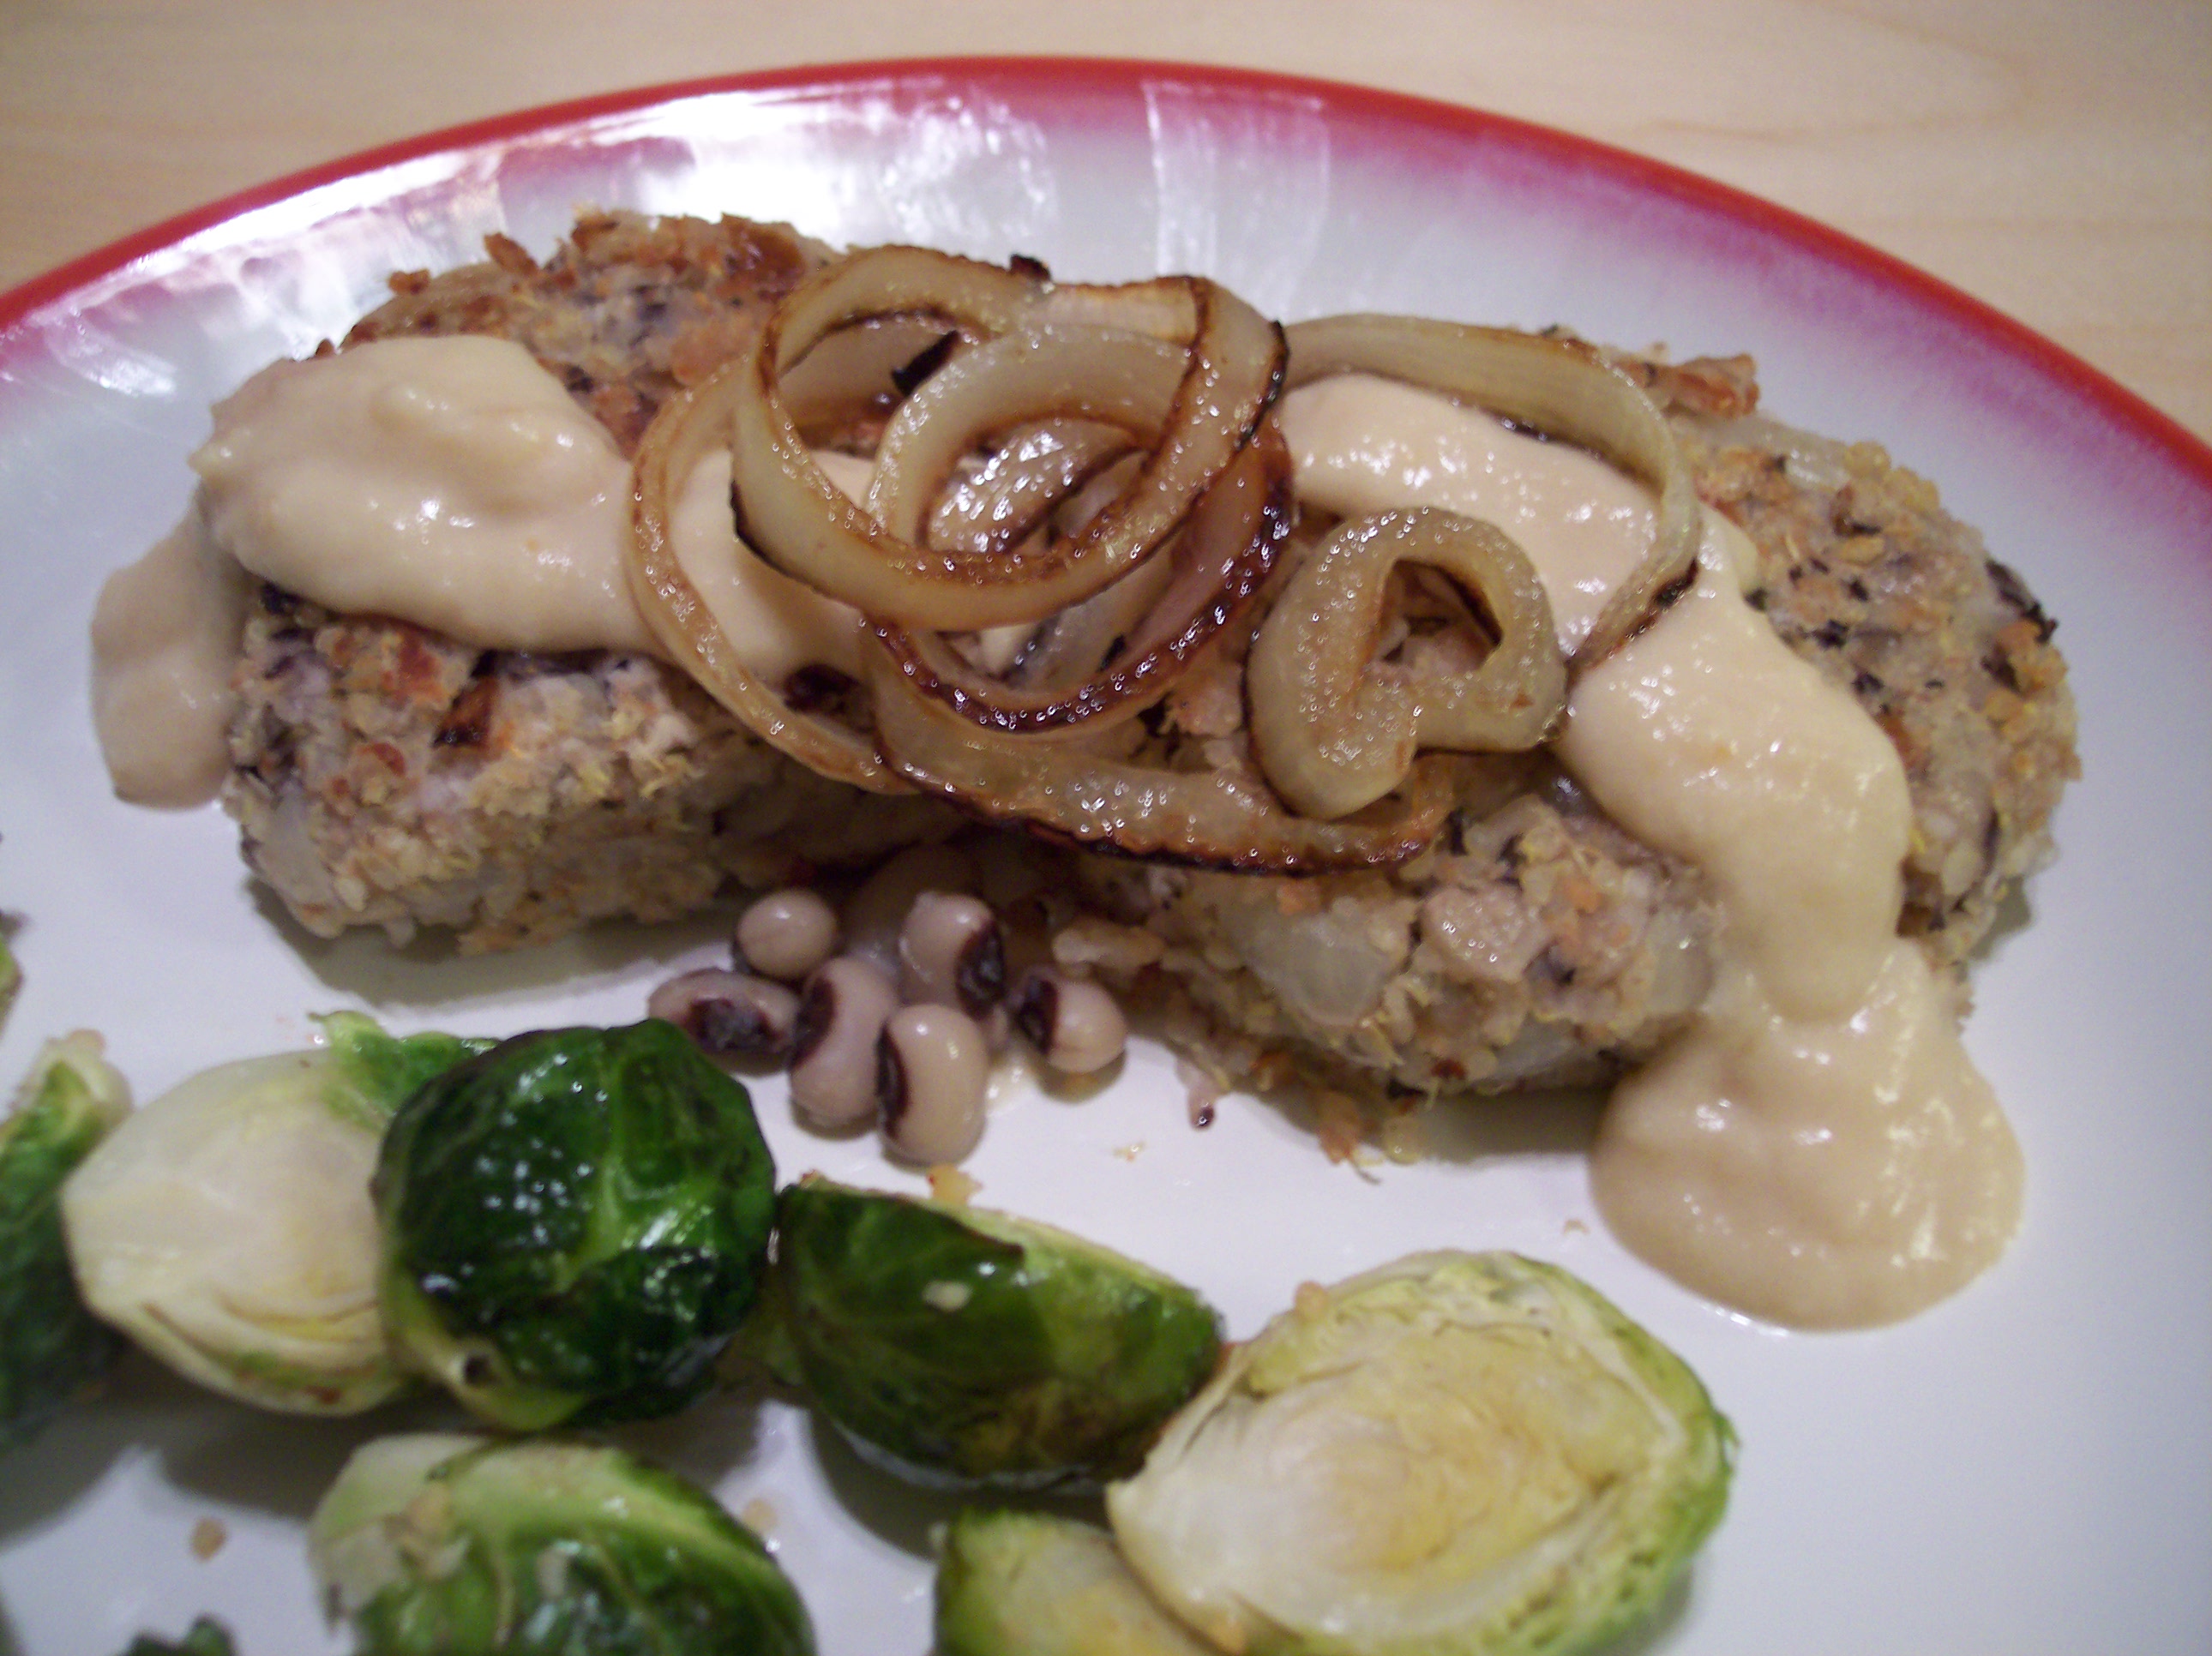 Black-eyed Pea and Quinoa Cakes with Roasted Garlic Sauce and Carmelized Onions